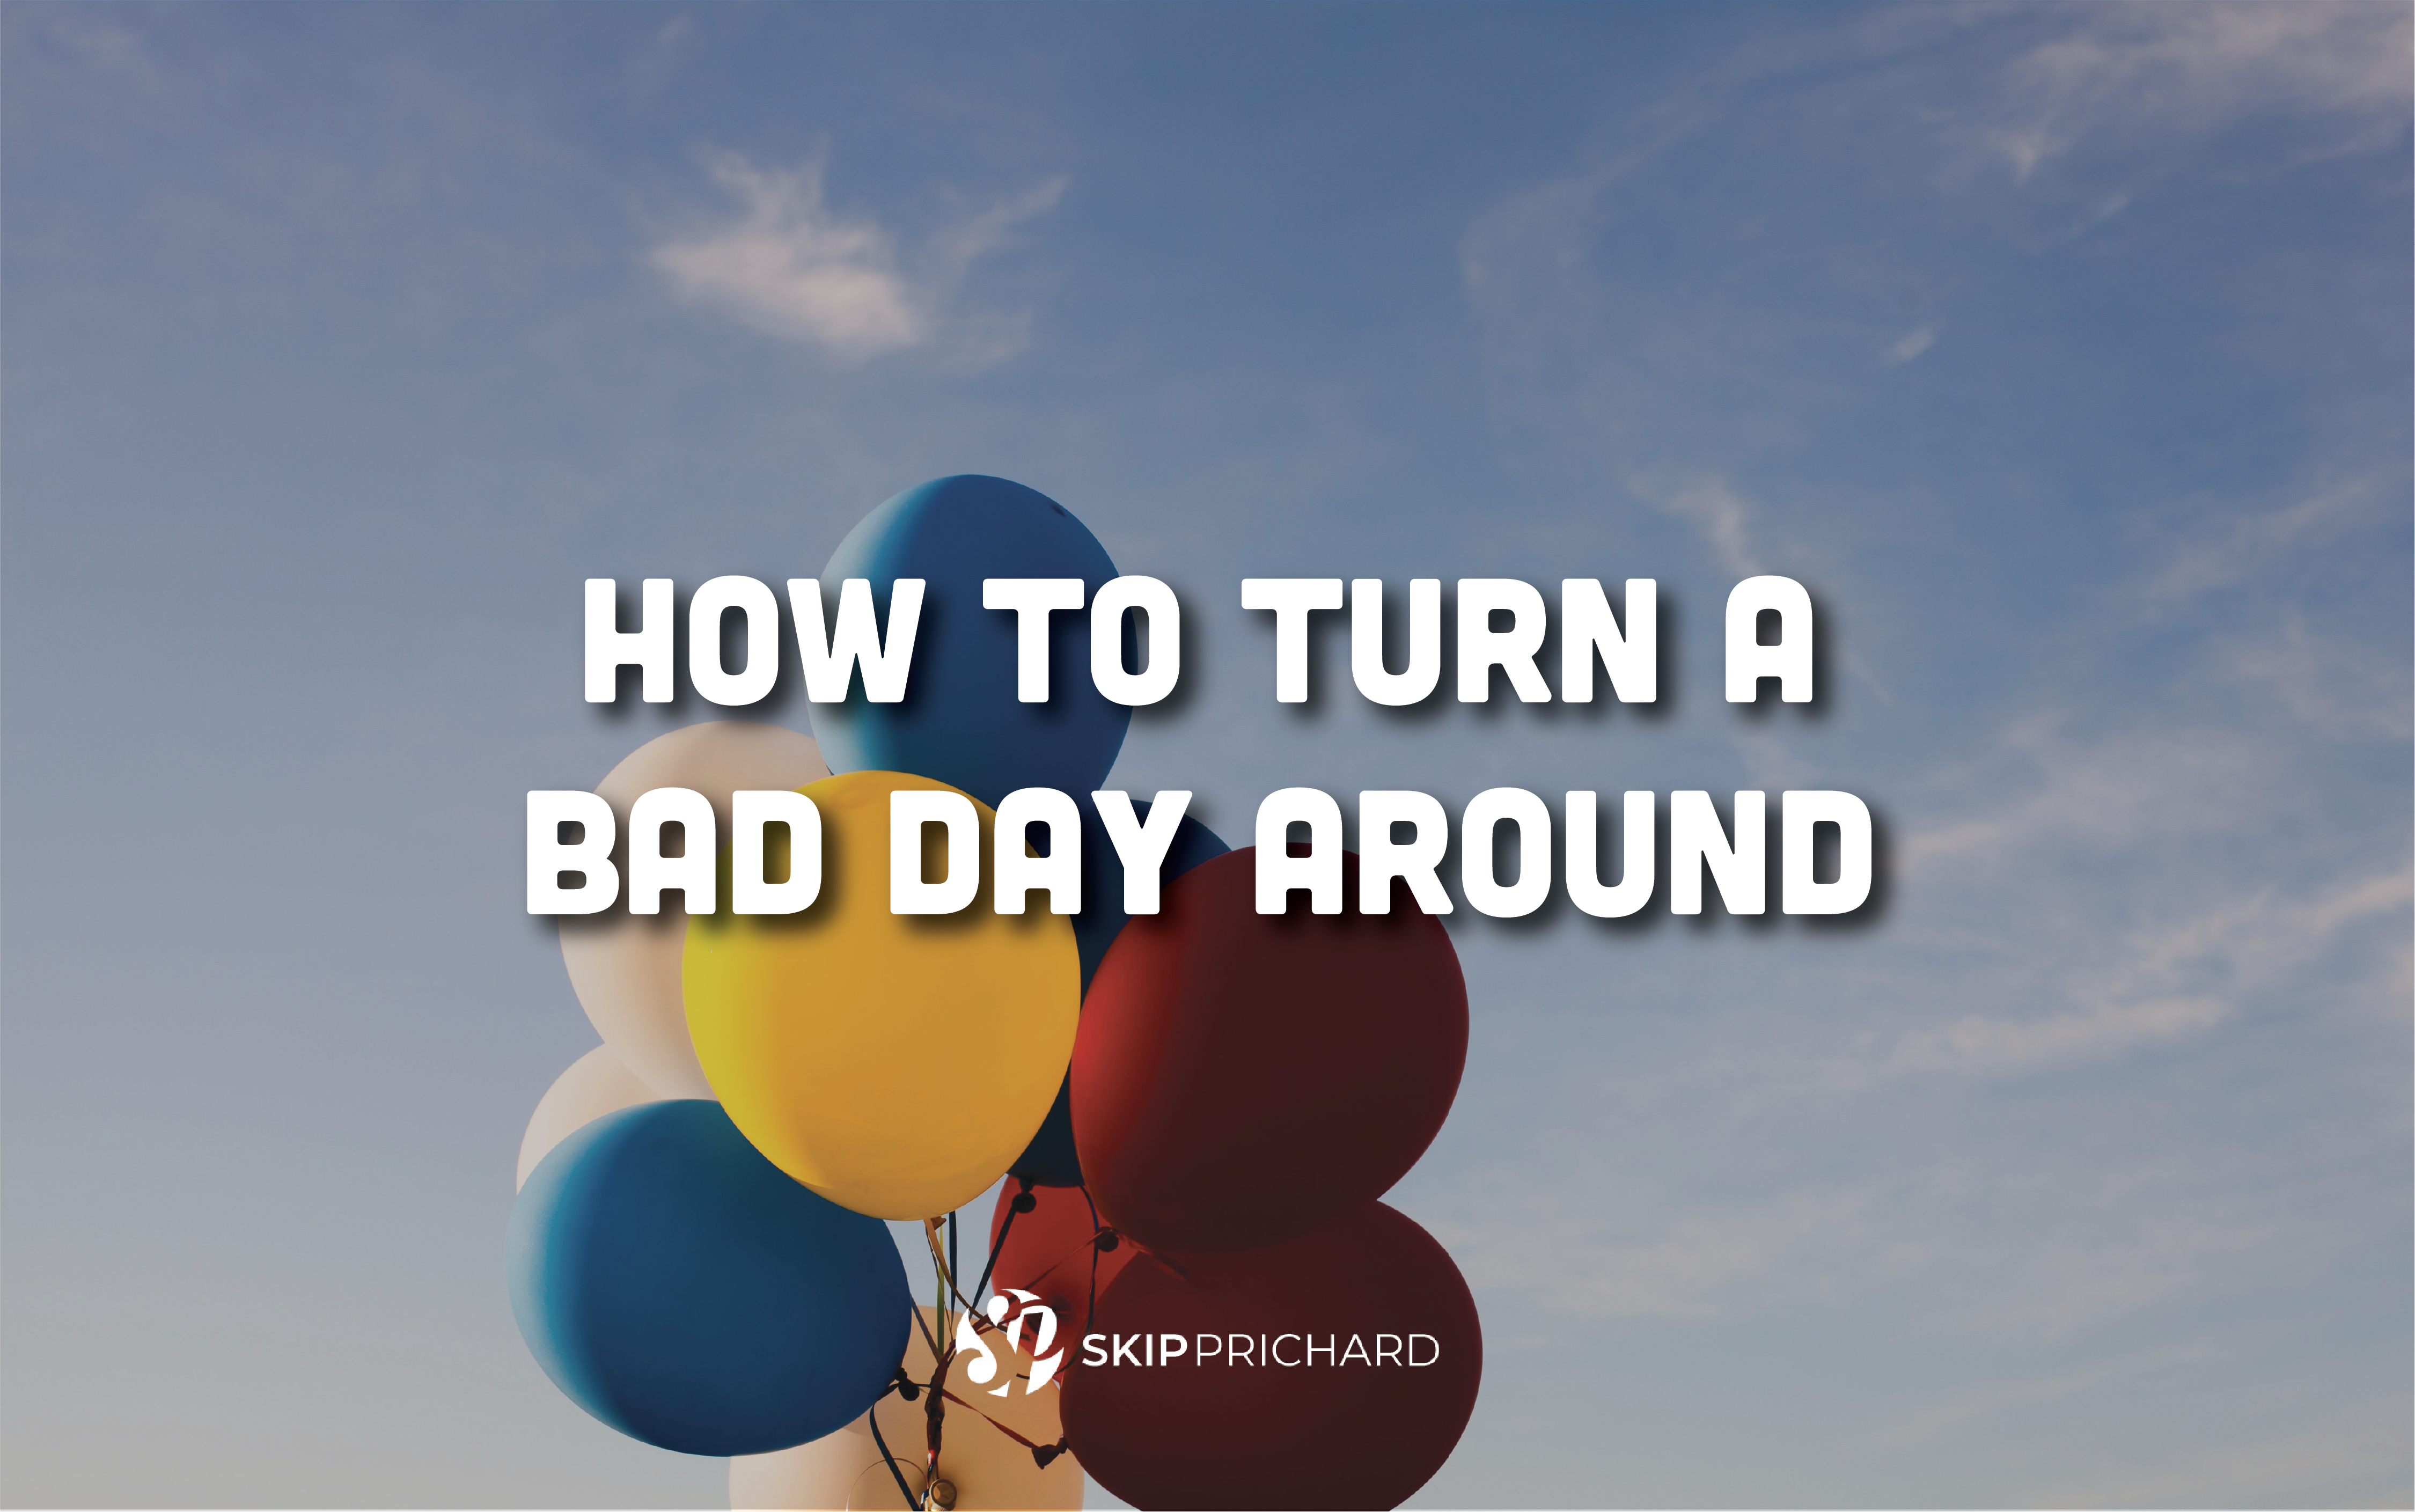 How to Turn a Bad Day Around